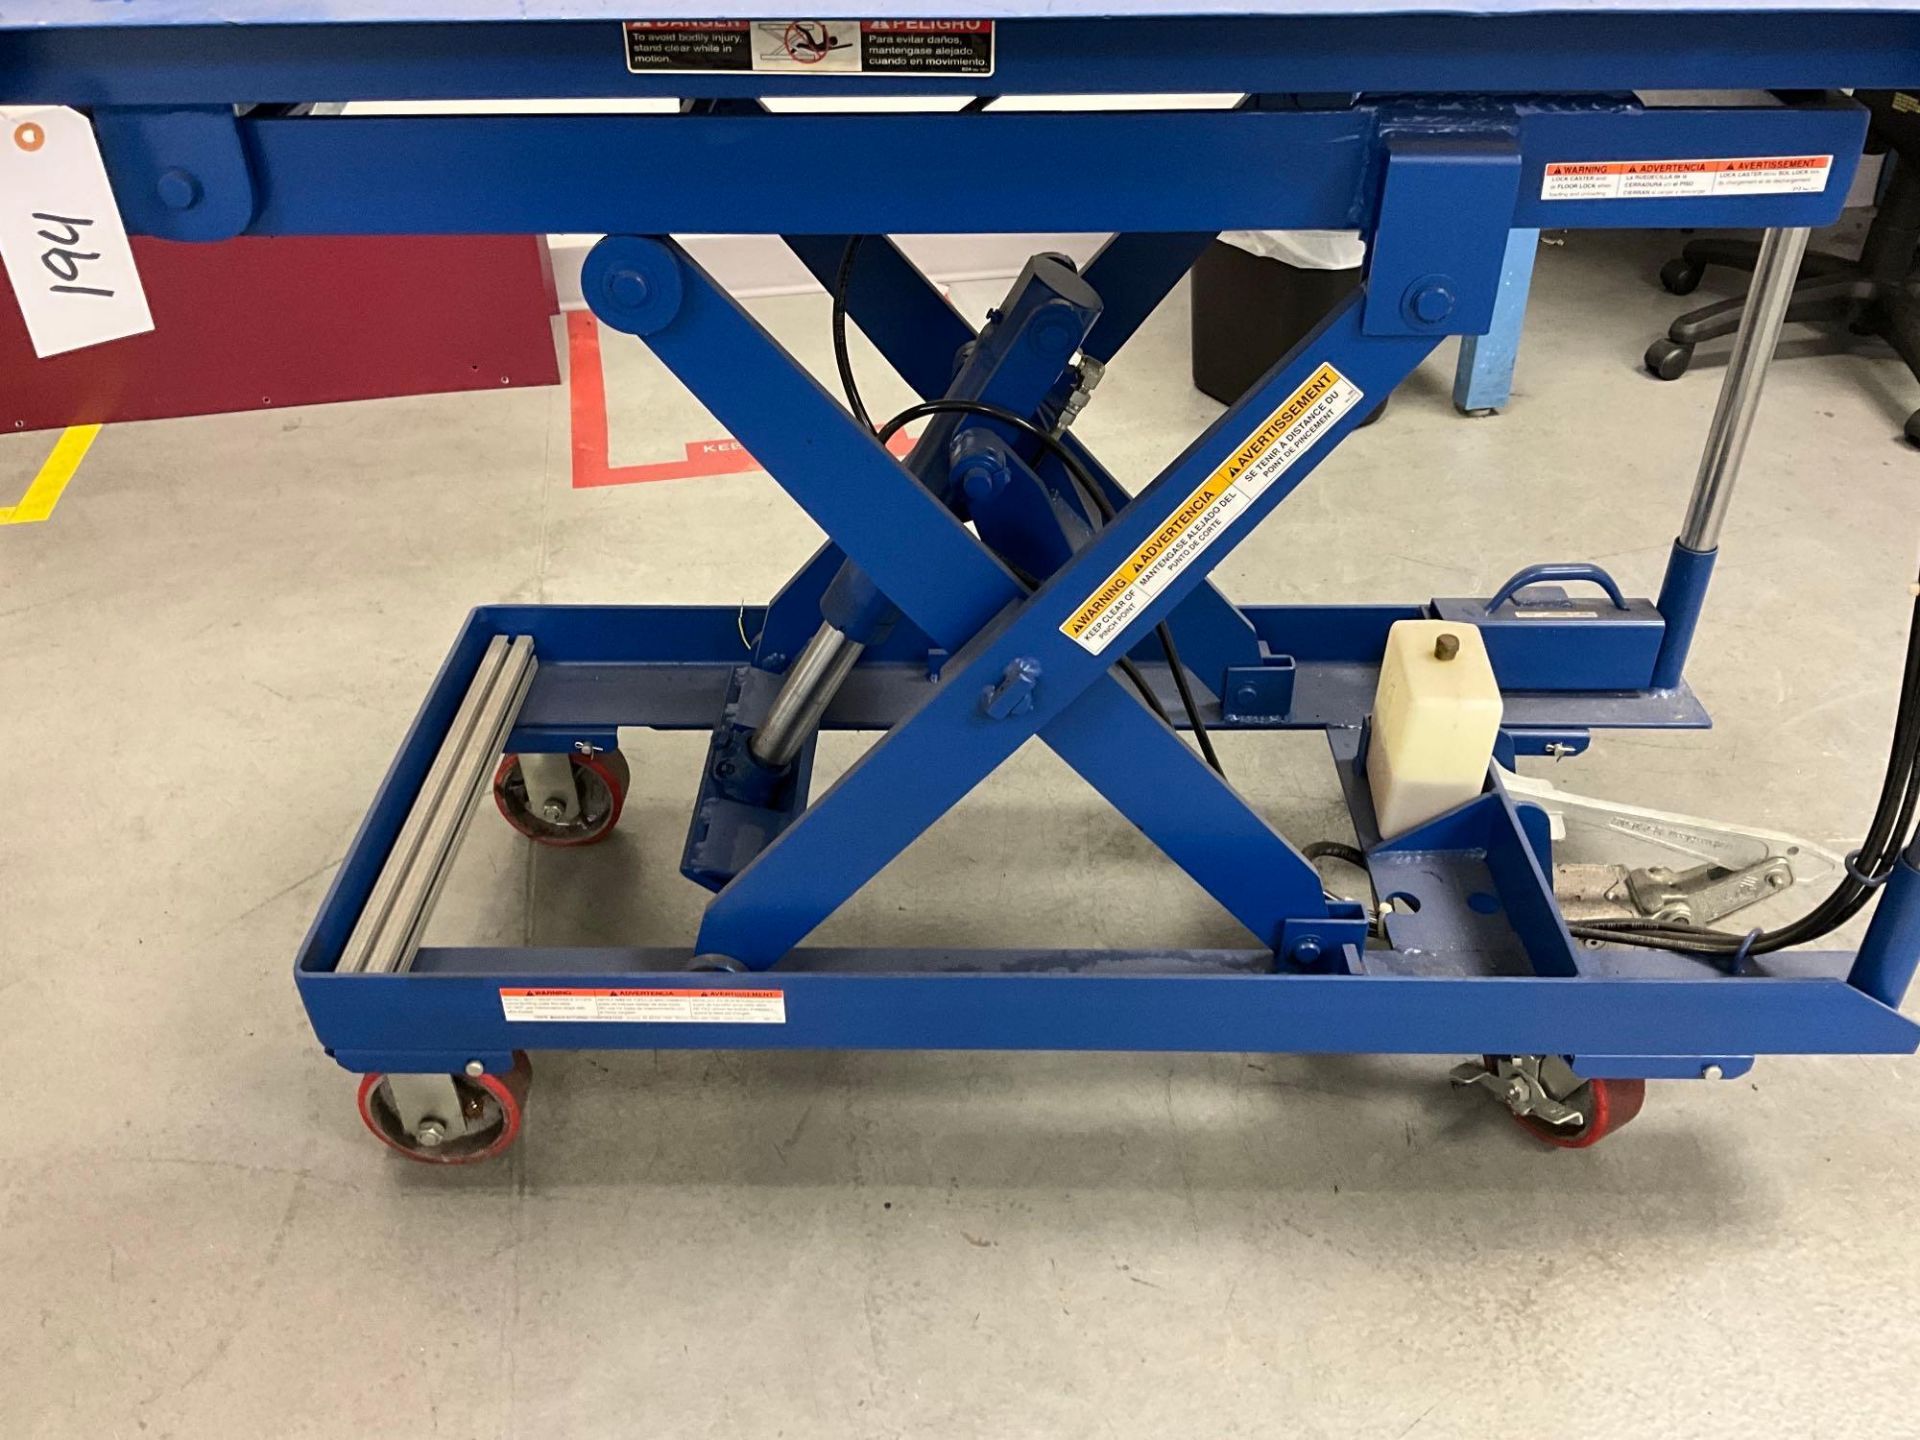 ADJUSTABLE HEIGHT WORK CART (NO CONTENTS) - Image 10 of 12